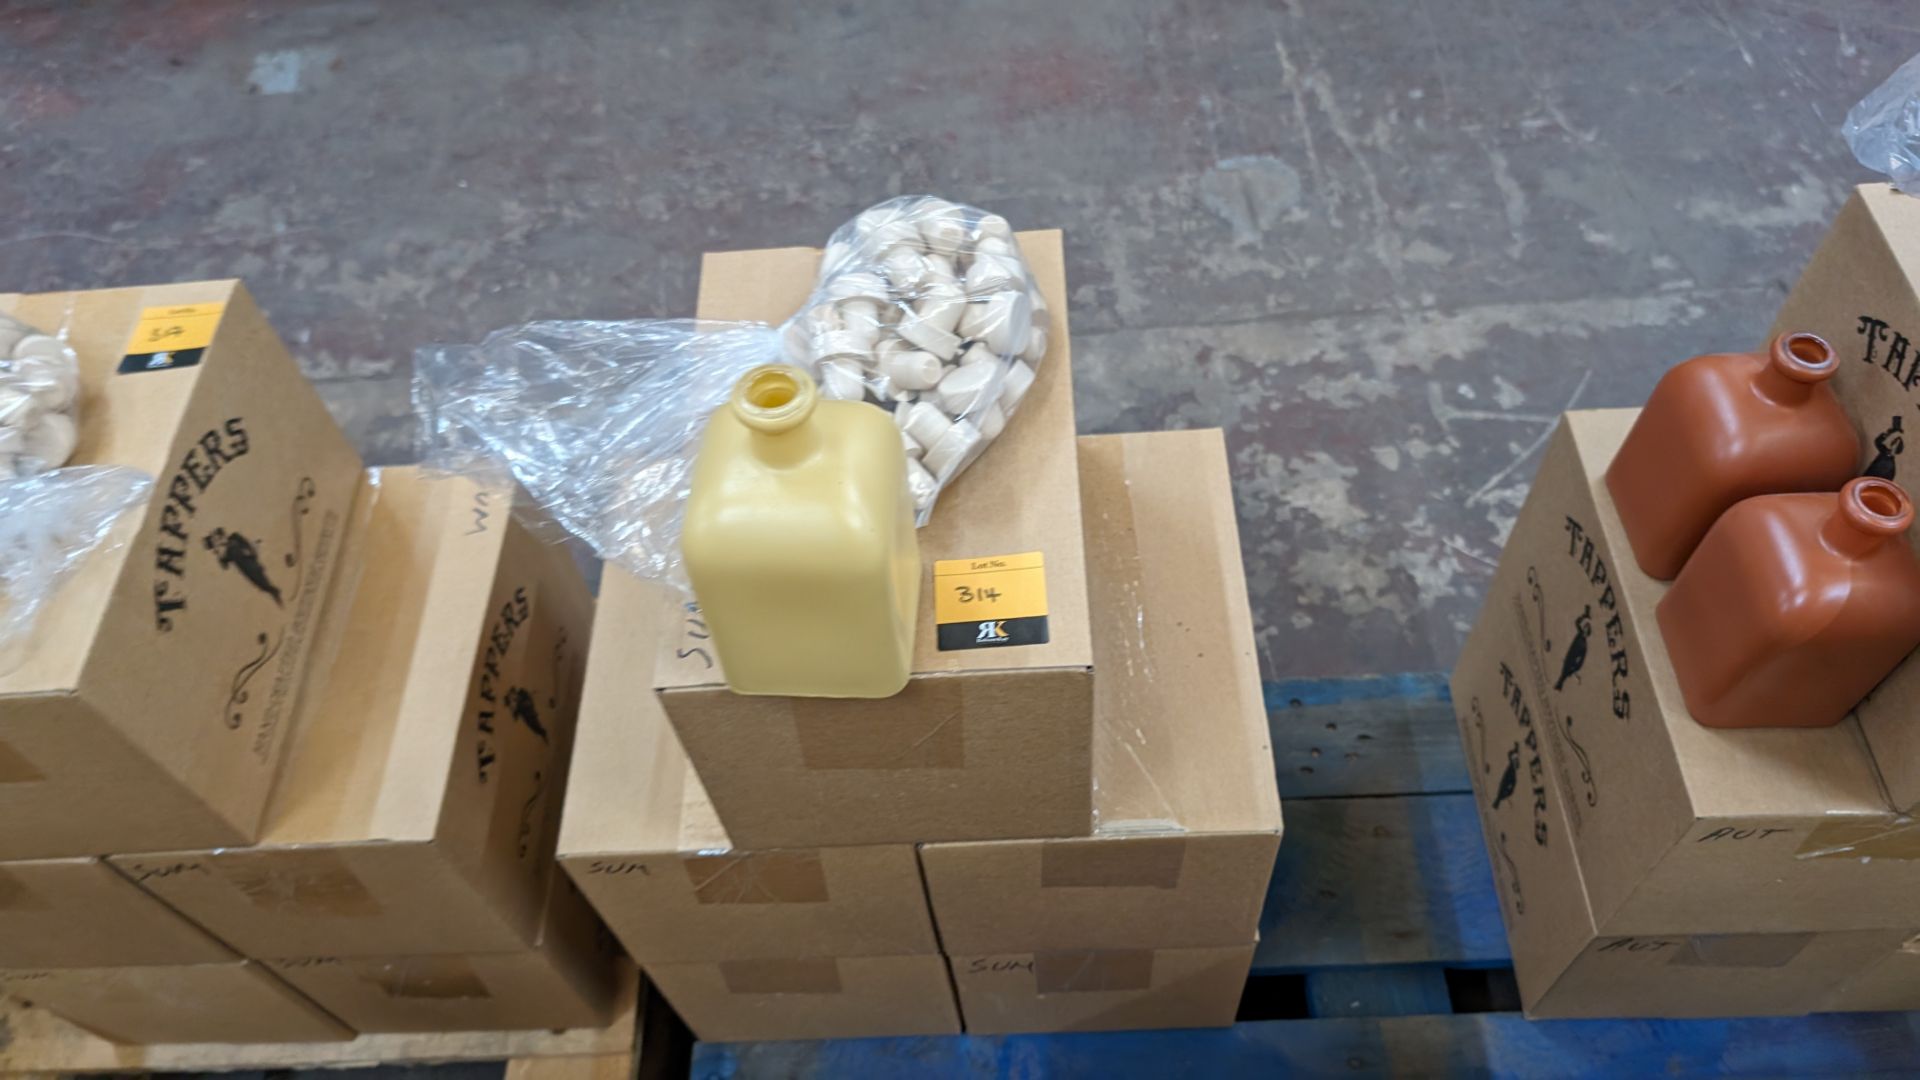 30 off 50cl/500ml professionally painted beige glass bottles, each including a stopper. The bottles